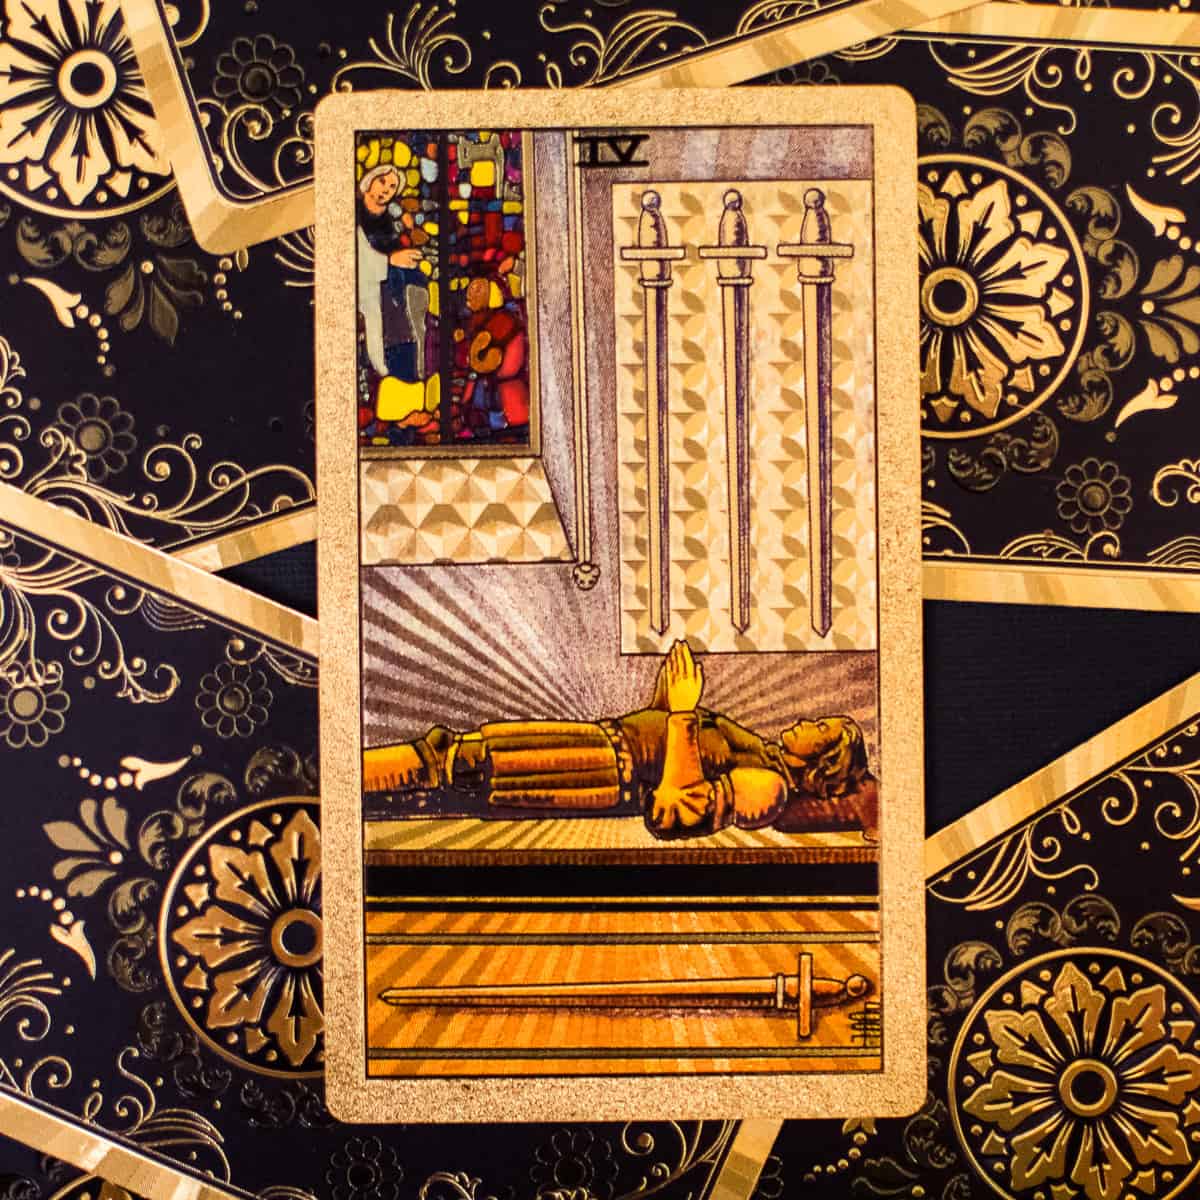 A person in deep sleep on a table surrounded by 4 swords on a tarot card.